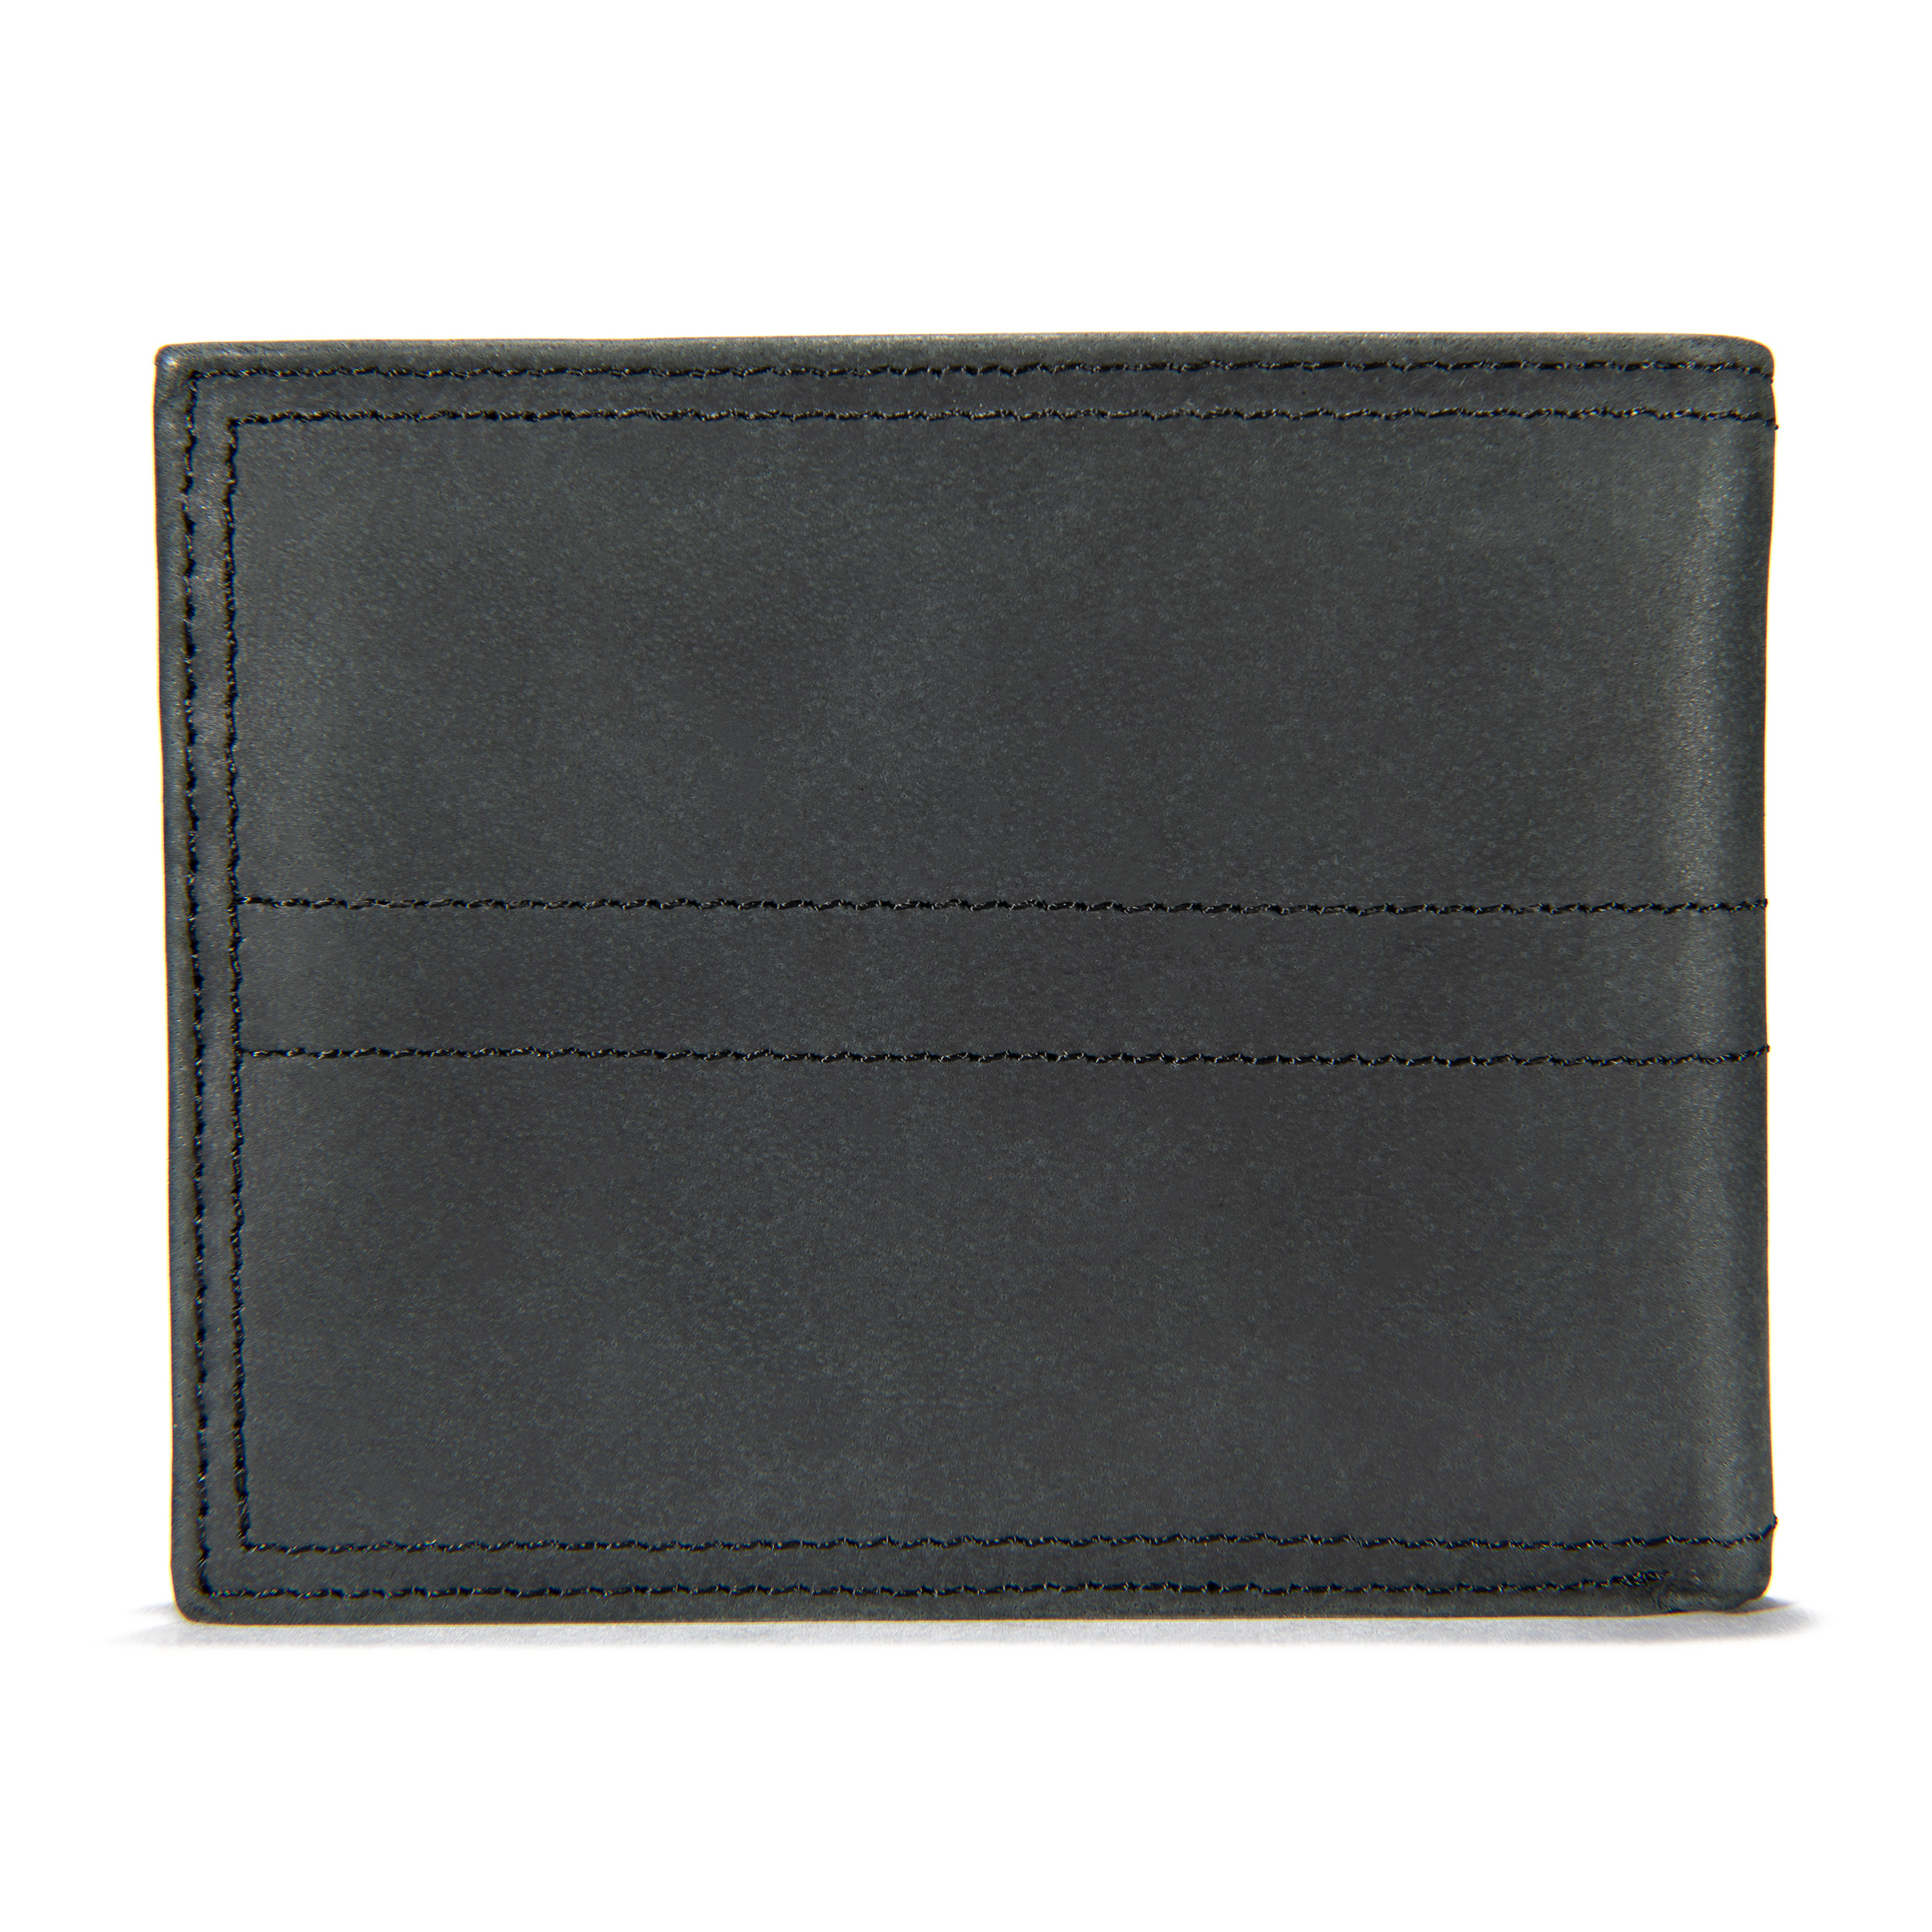 Picture of Carhartt B0000207 Mens Saddle Leather Bifold Wallet